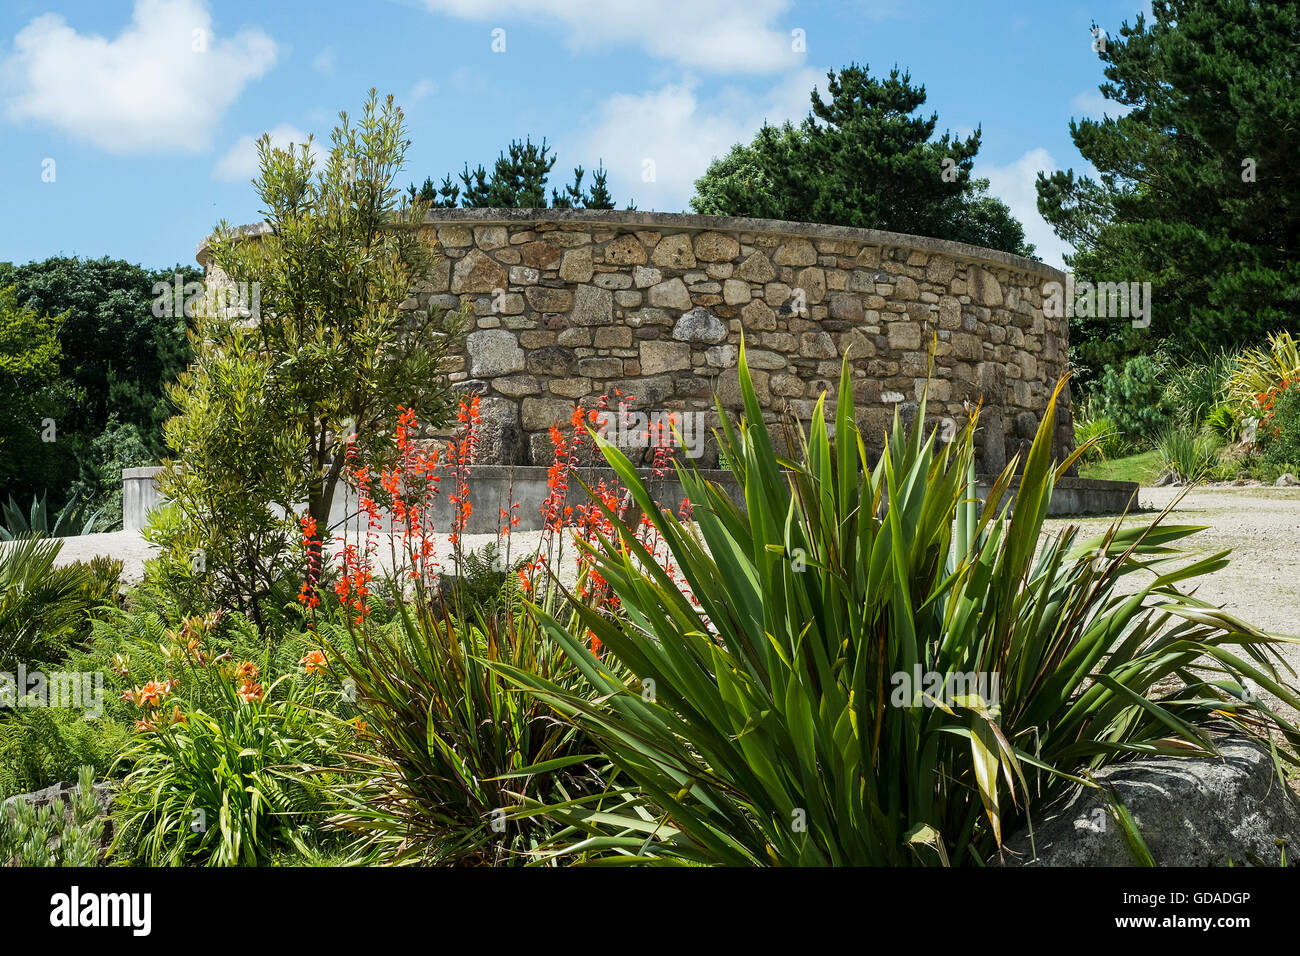 The exterior of James Turrell’s Tewlwolow Kernow at Tremenheere Sculpture Gardens in Cornwall. Stock Photo